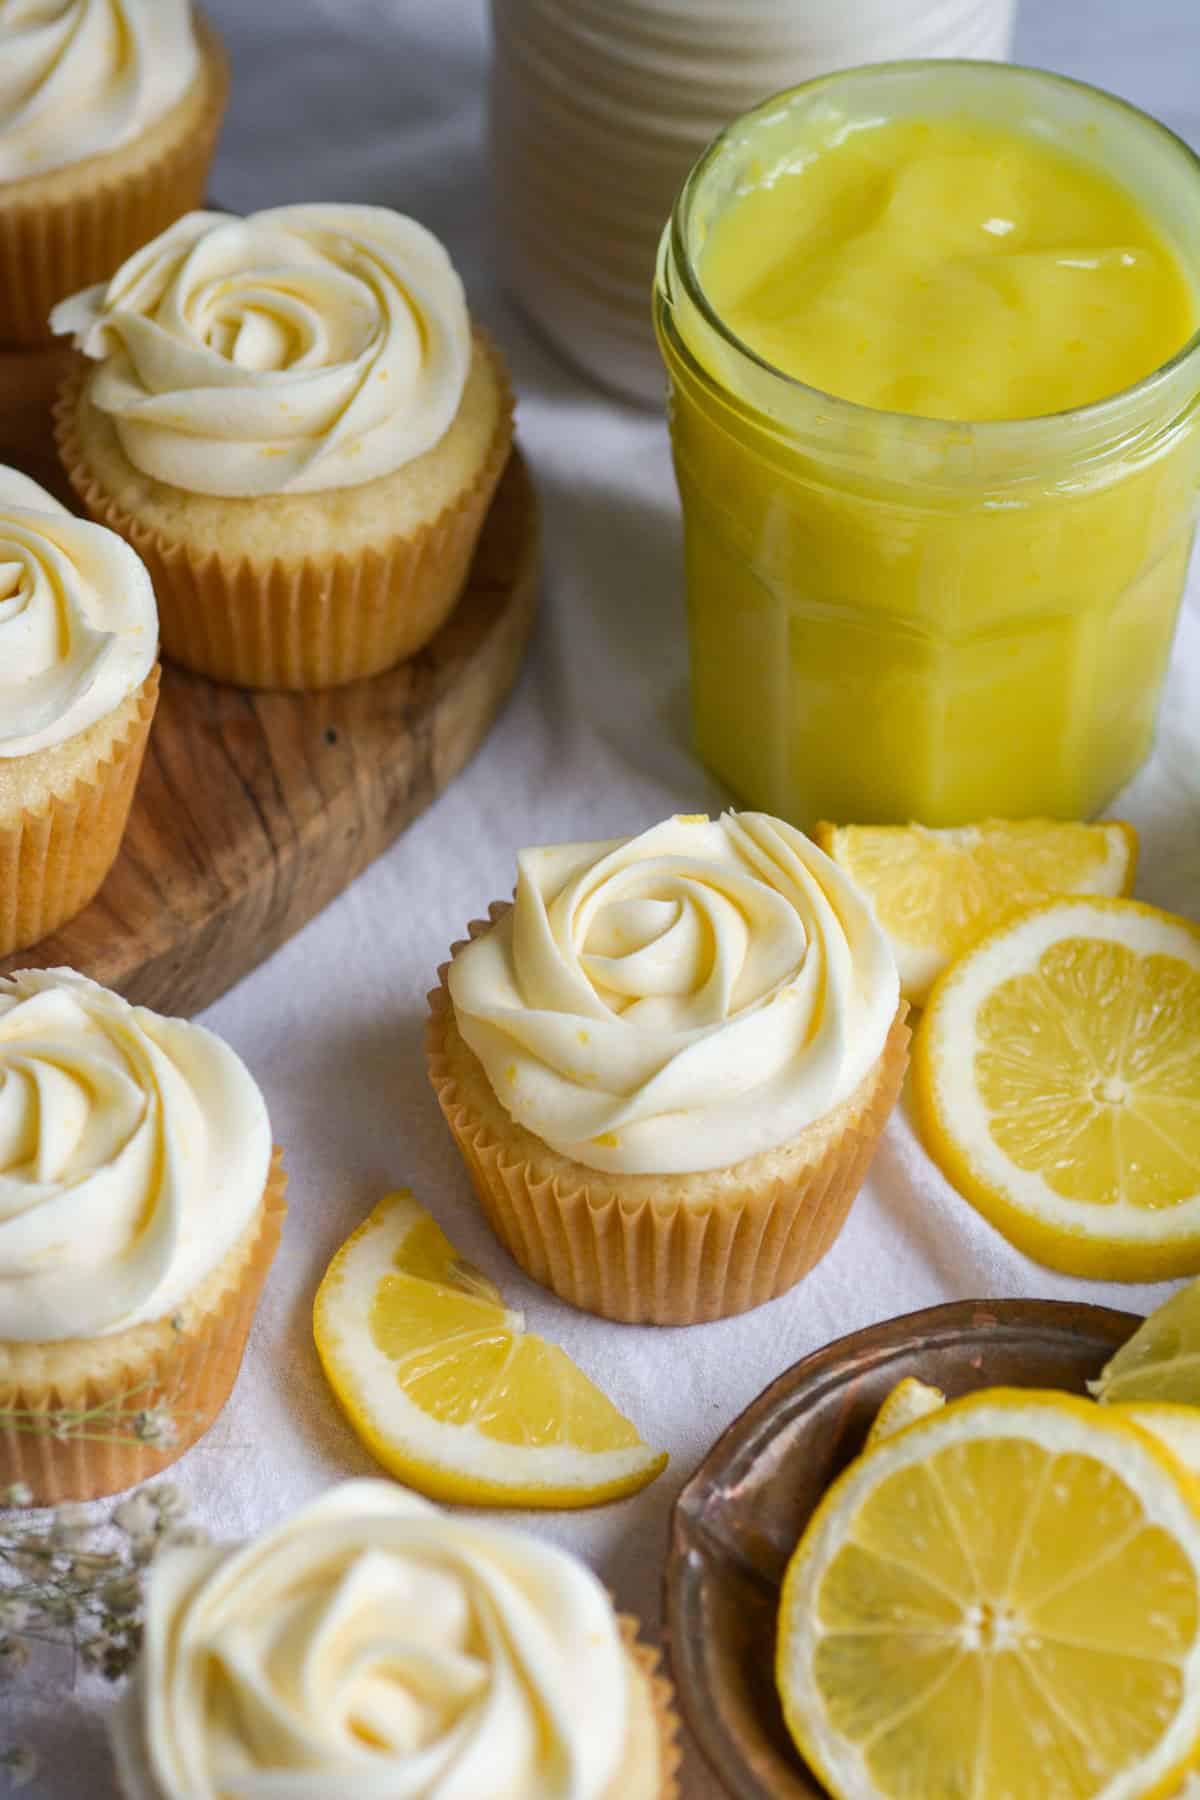 Frosted cupcakes on a cloth with lemon slices in the foreground and a glass jar of lemon curd in the background.